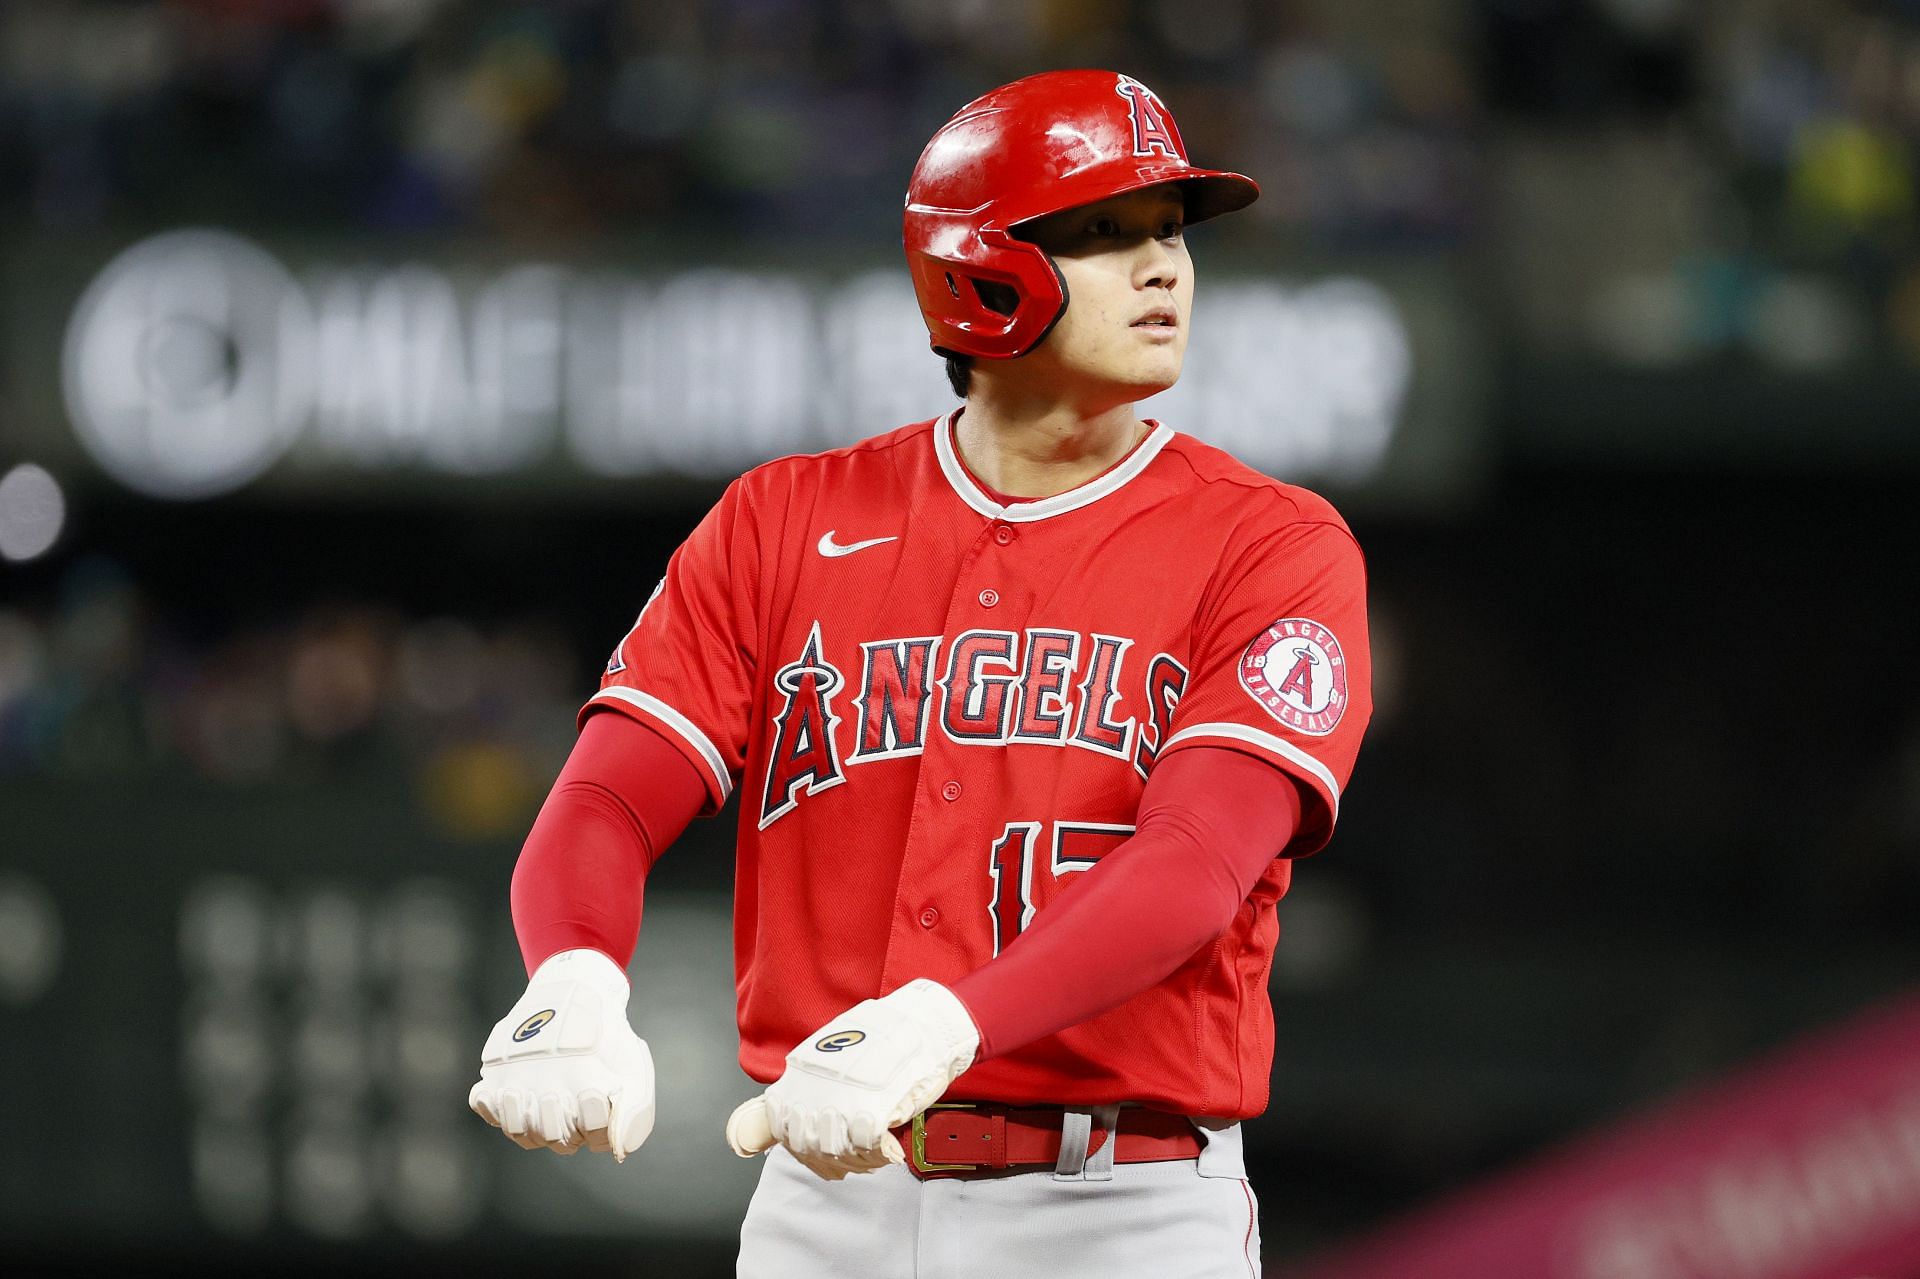 Instant Replay: L.A. Angels' Shohei Ohtani Hits 100th Home Run